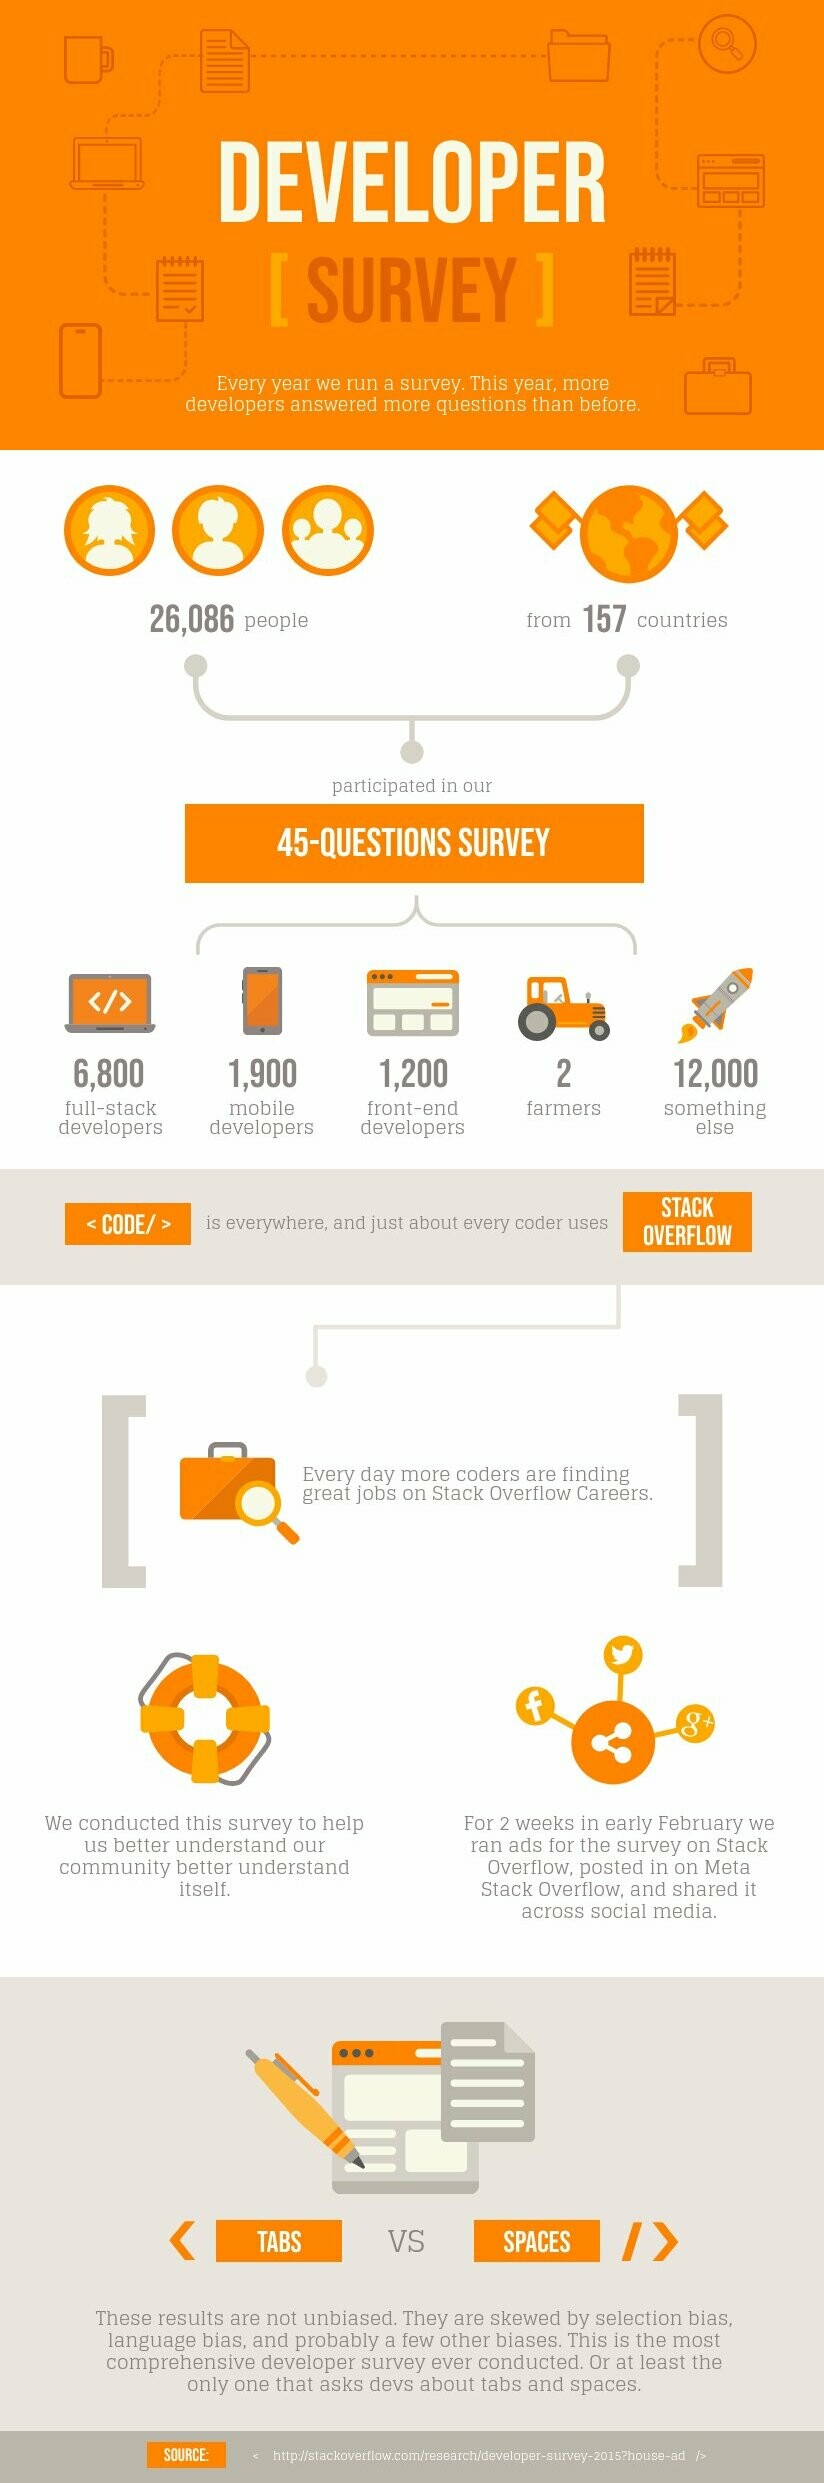 Developer Survey Results Infographic Template